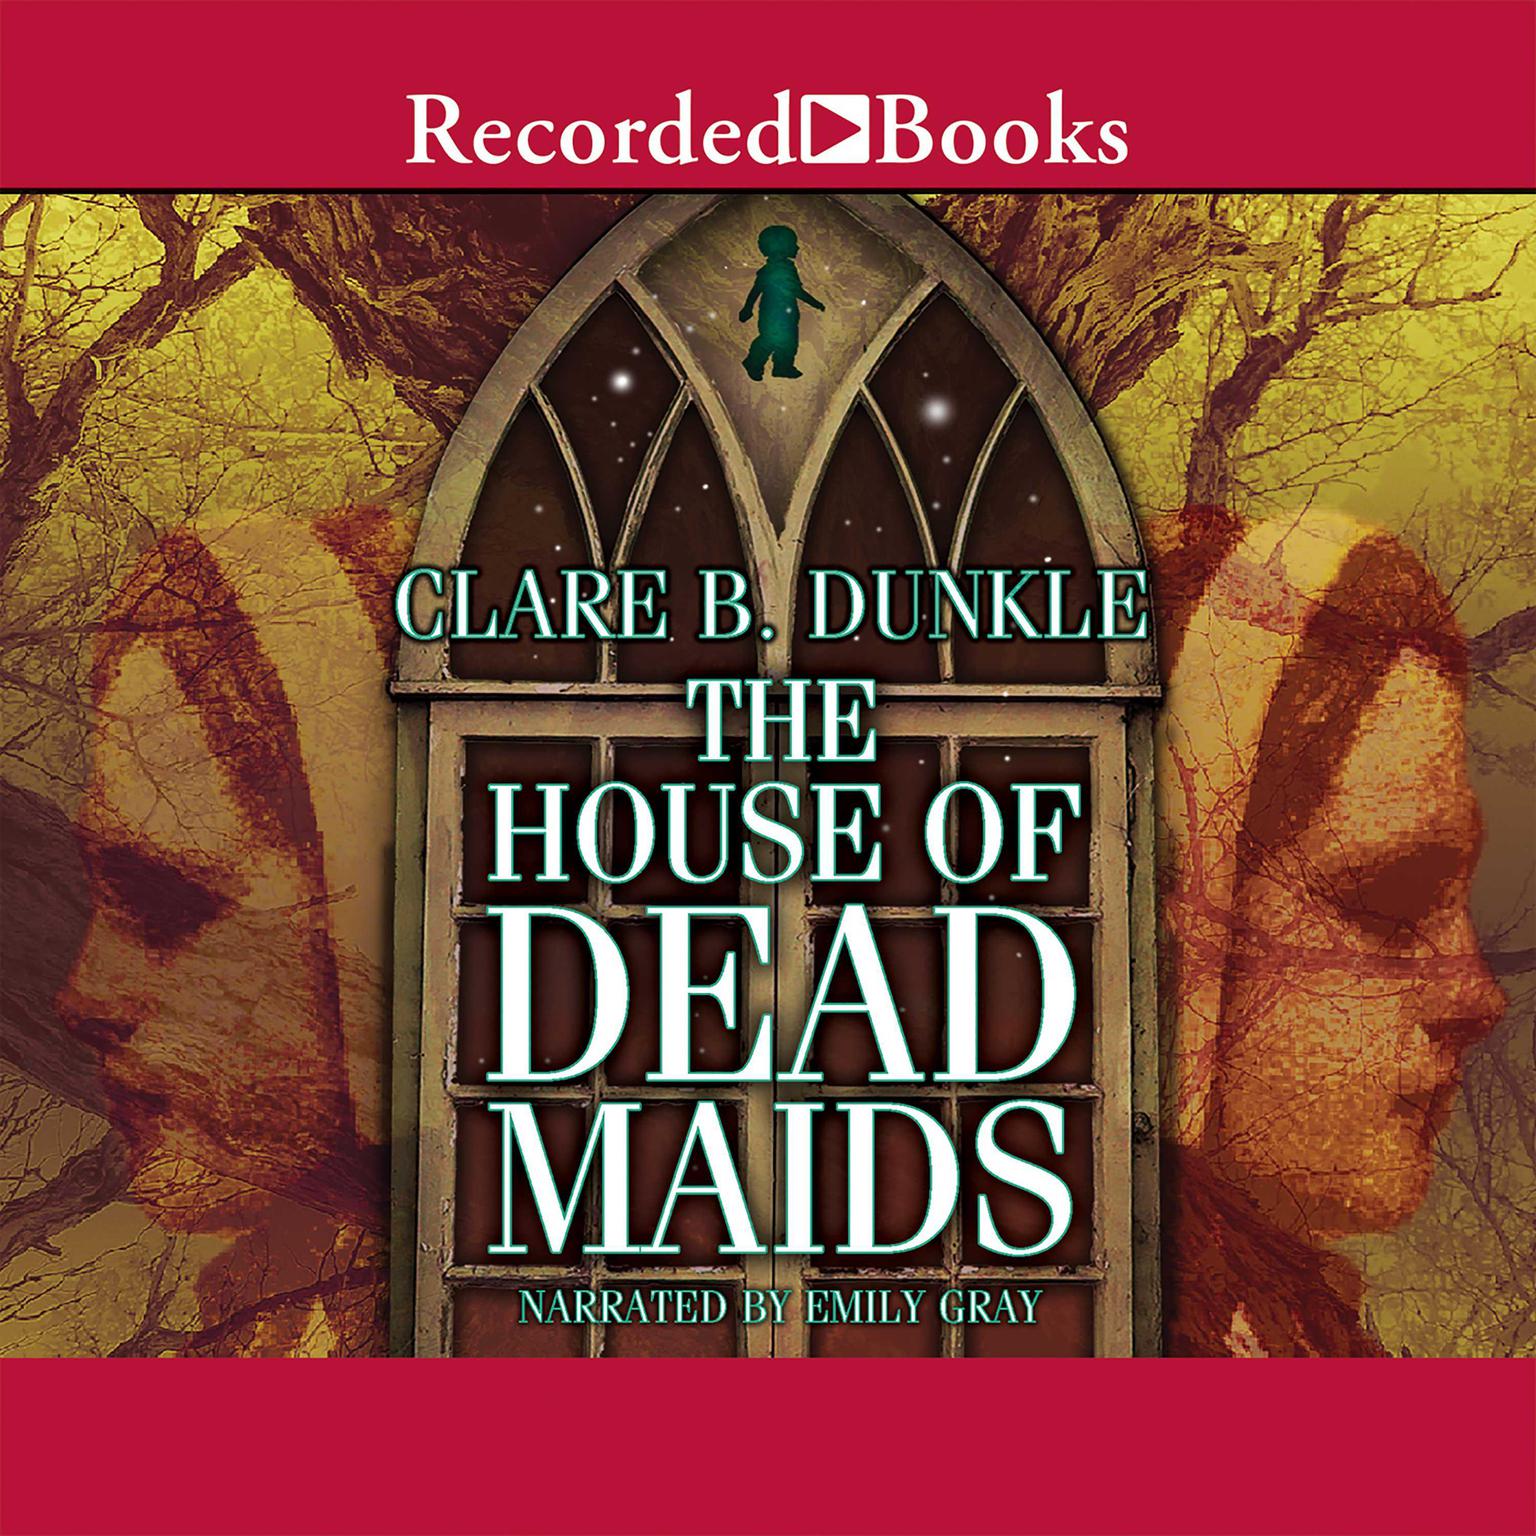 The House of Dead Maids: A Chilling Prelude to Wuthering Heights Audiobook, by Clare B. Dunkle